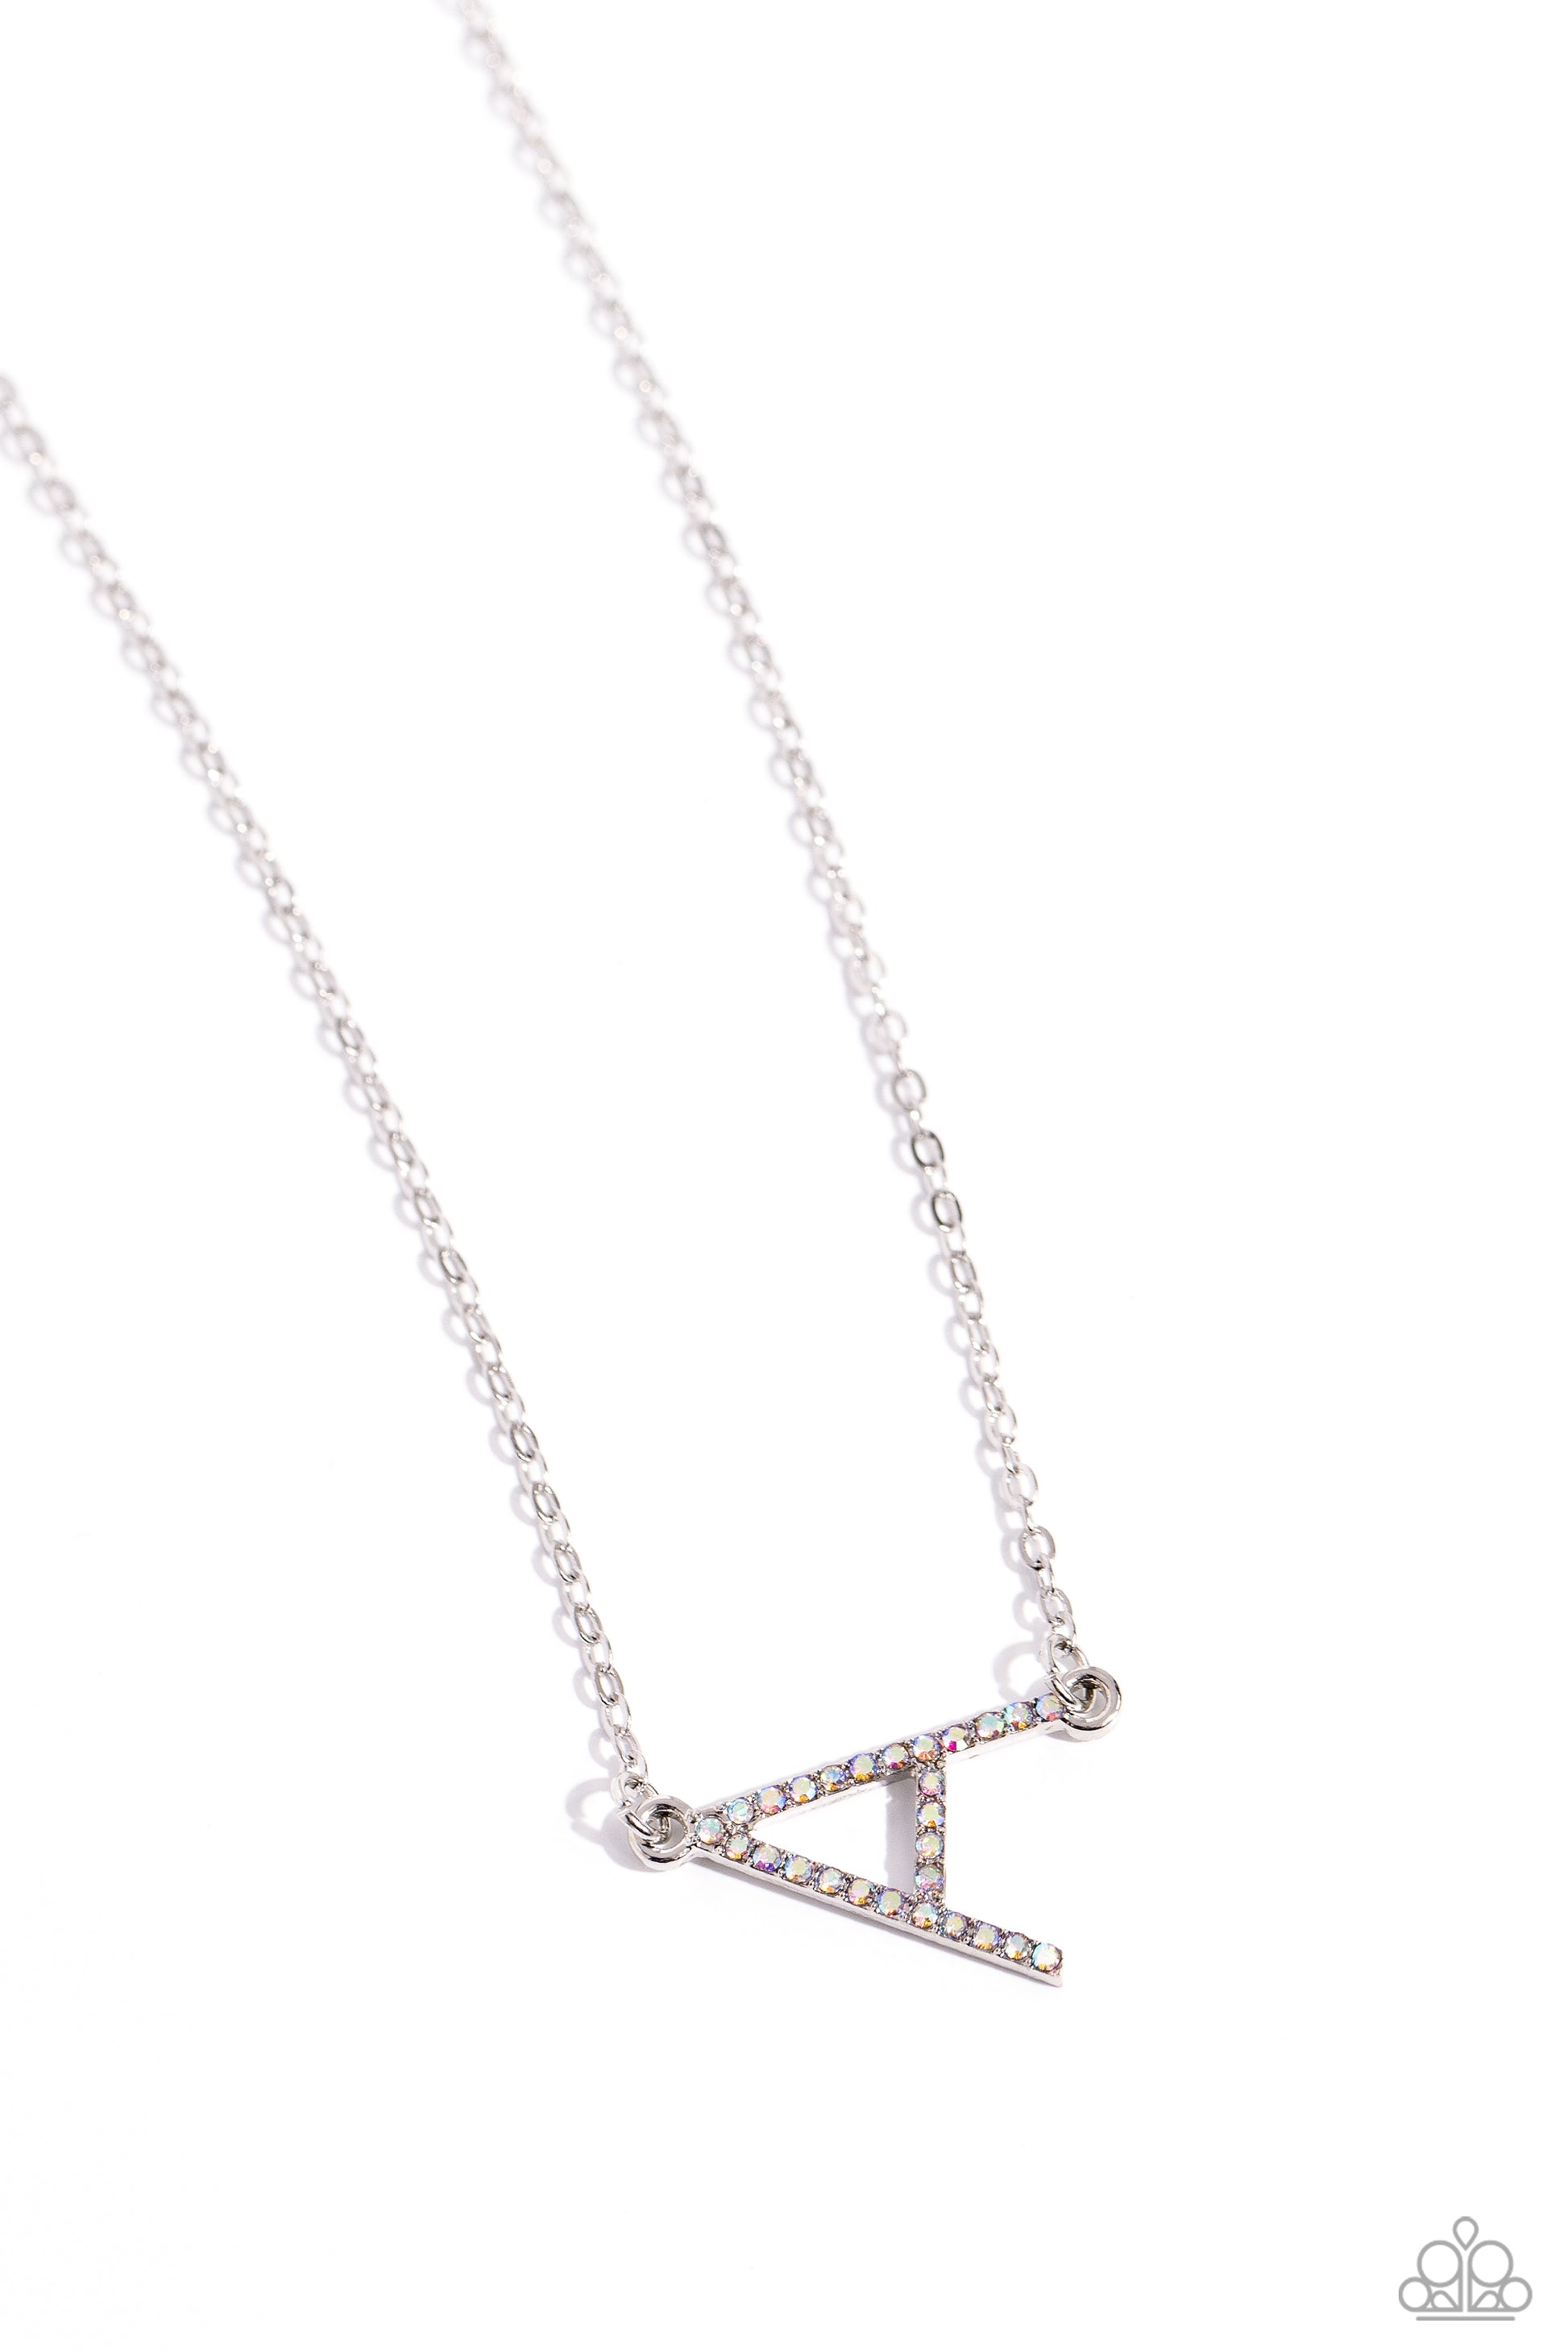 INITIALLY Yours Multi "A" Necklace - Paparazzi Accessories  Embossed with dainty iridescent rhinestones, a silver letter "A" hovers below the collar from a dainty silver chain, for a sentimentally simple design. Features an adjustable clasp closure. Due to its prismatic palette, color may vary.  Sold as one individual necklace. Includes one pair of matching earrings.  P2DA-MTXX-124XX